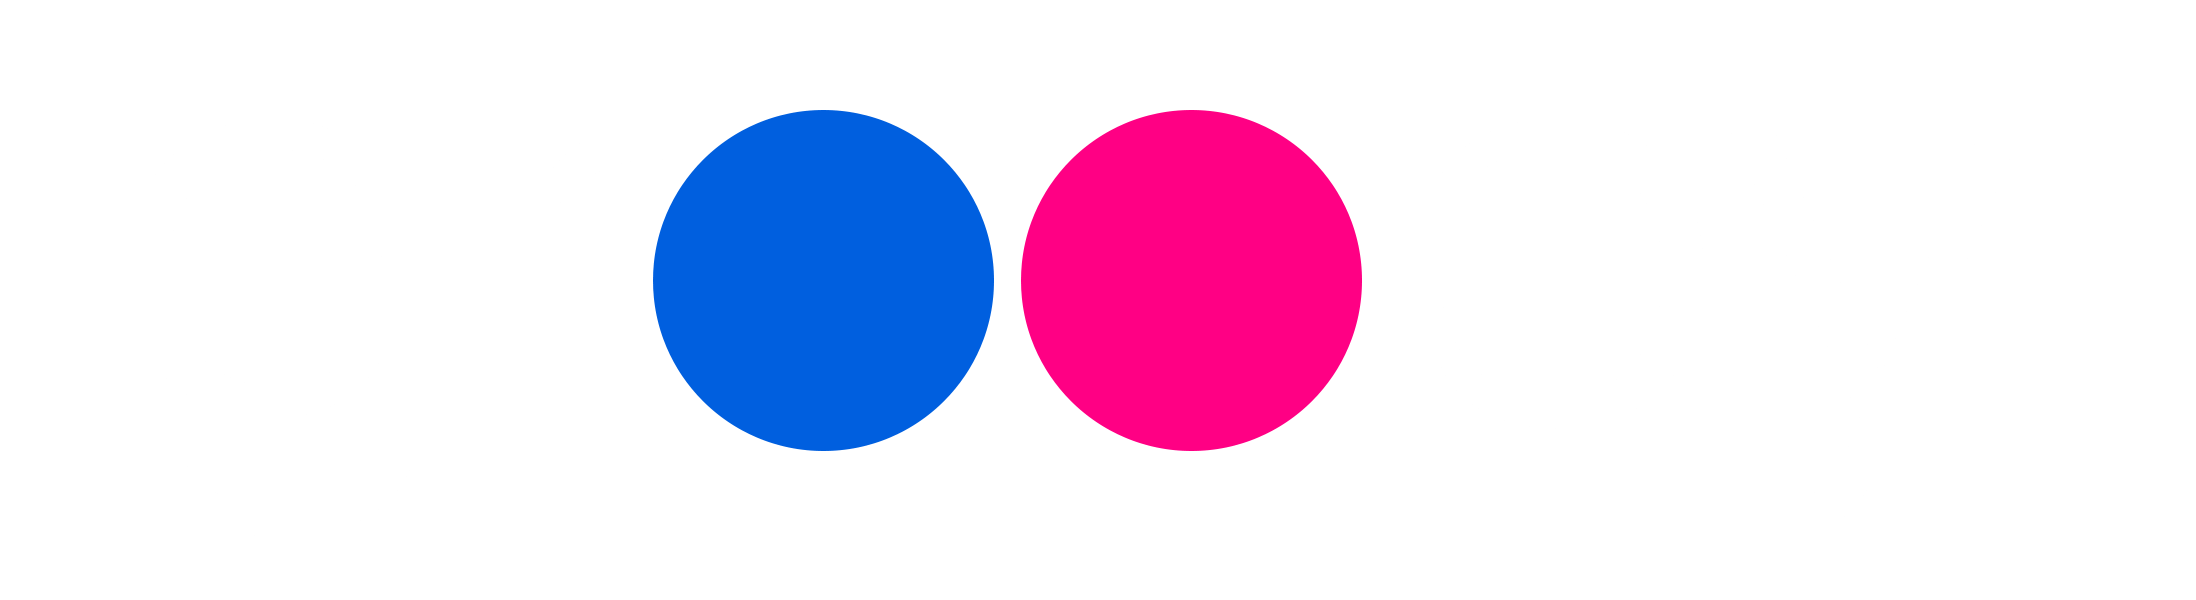 Jimmy: Logo With Blue Dot And Pink Dot. 